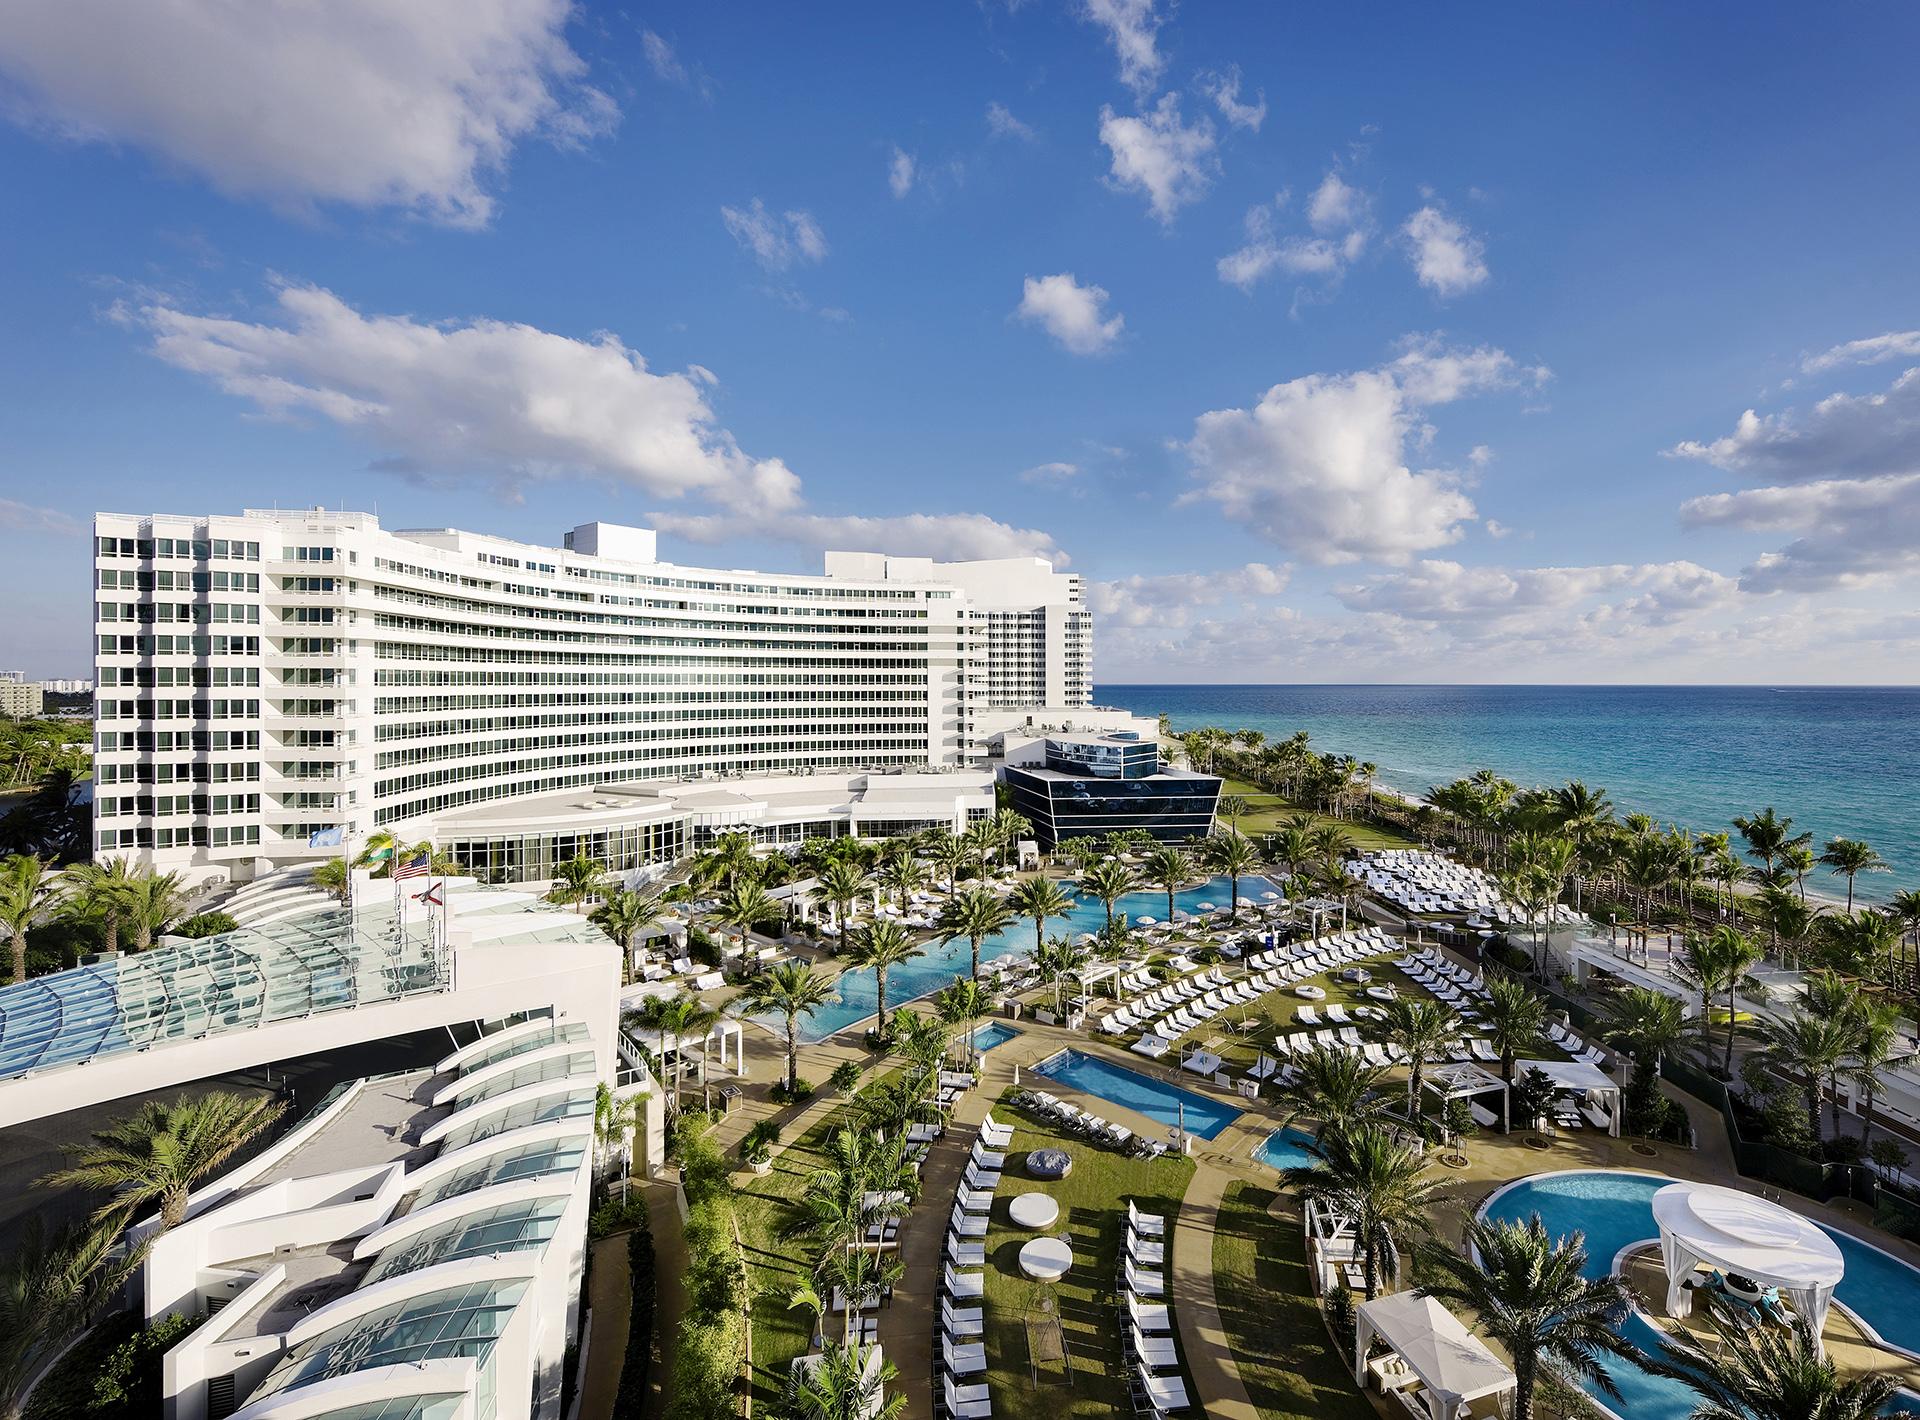 Stand in Spotlight at Fontainebleau Miami Beach